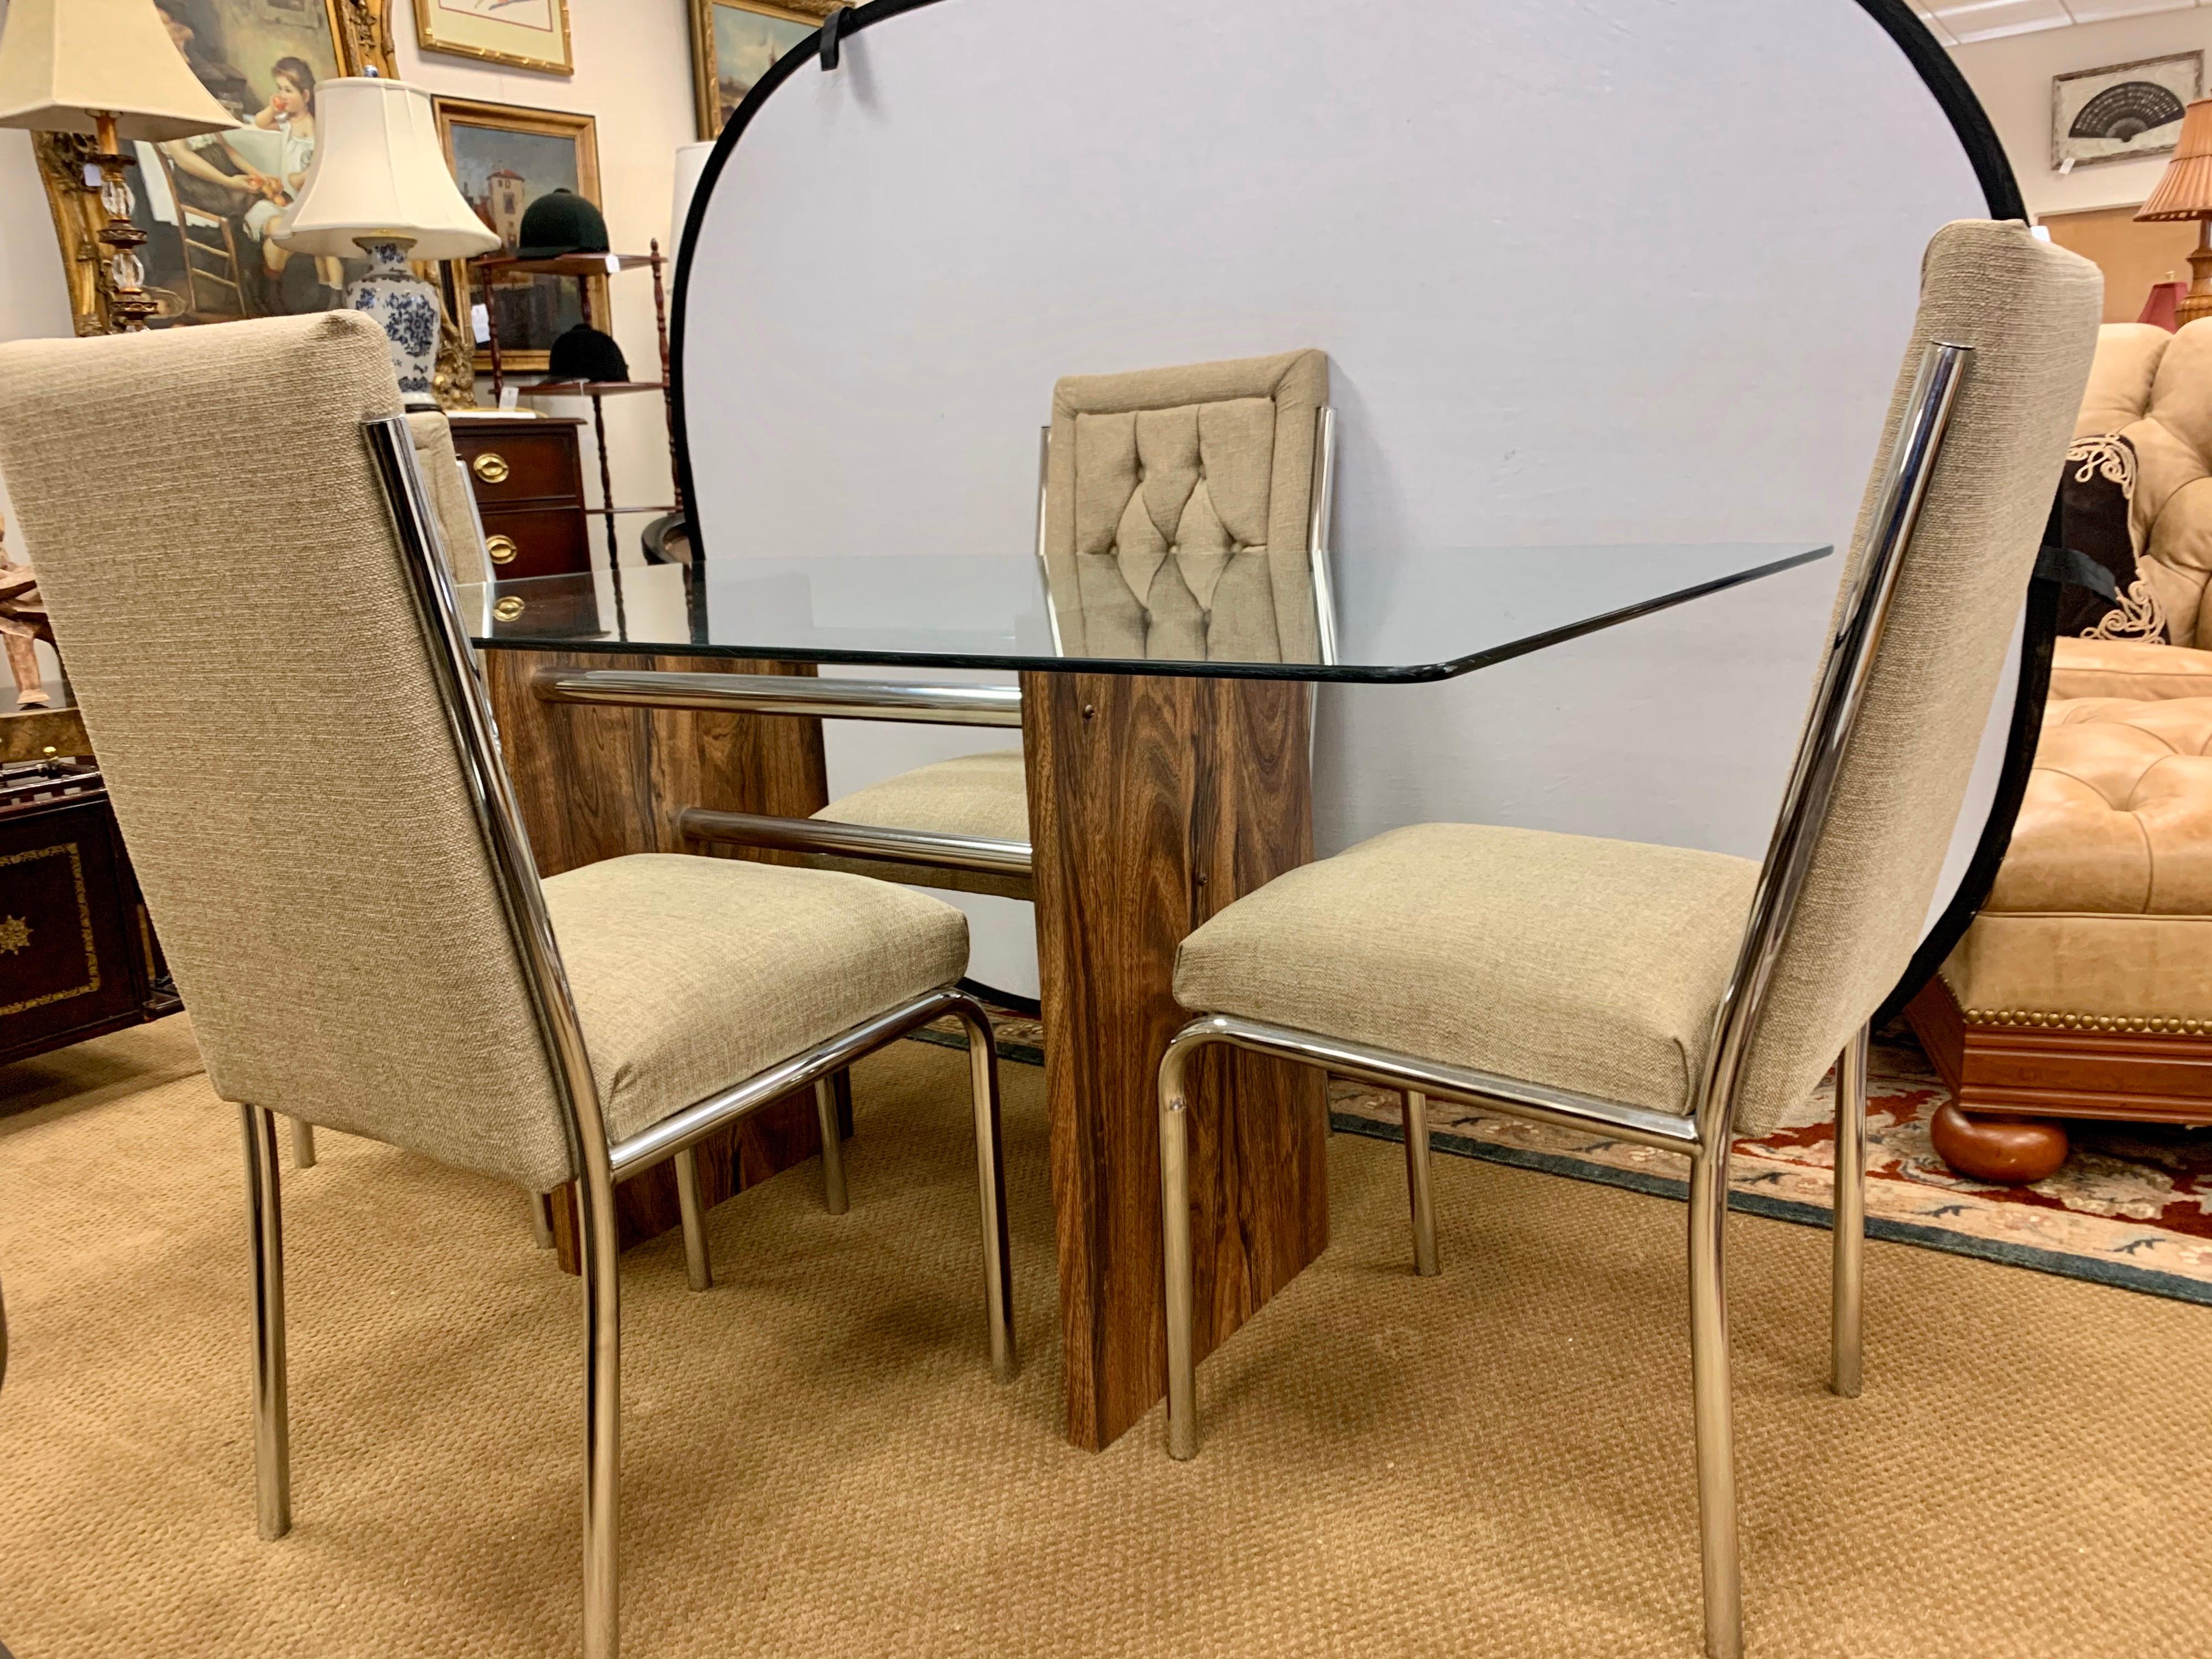 True period piece in the style of Milo Baughman, this glass and rosewood veneered dining table has a great scale, not too big and not too small. It comes with four matching newly upholstered chrome chairs where upholstery is a neutral color that